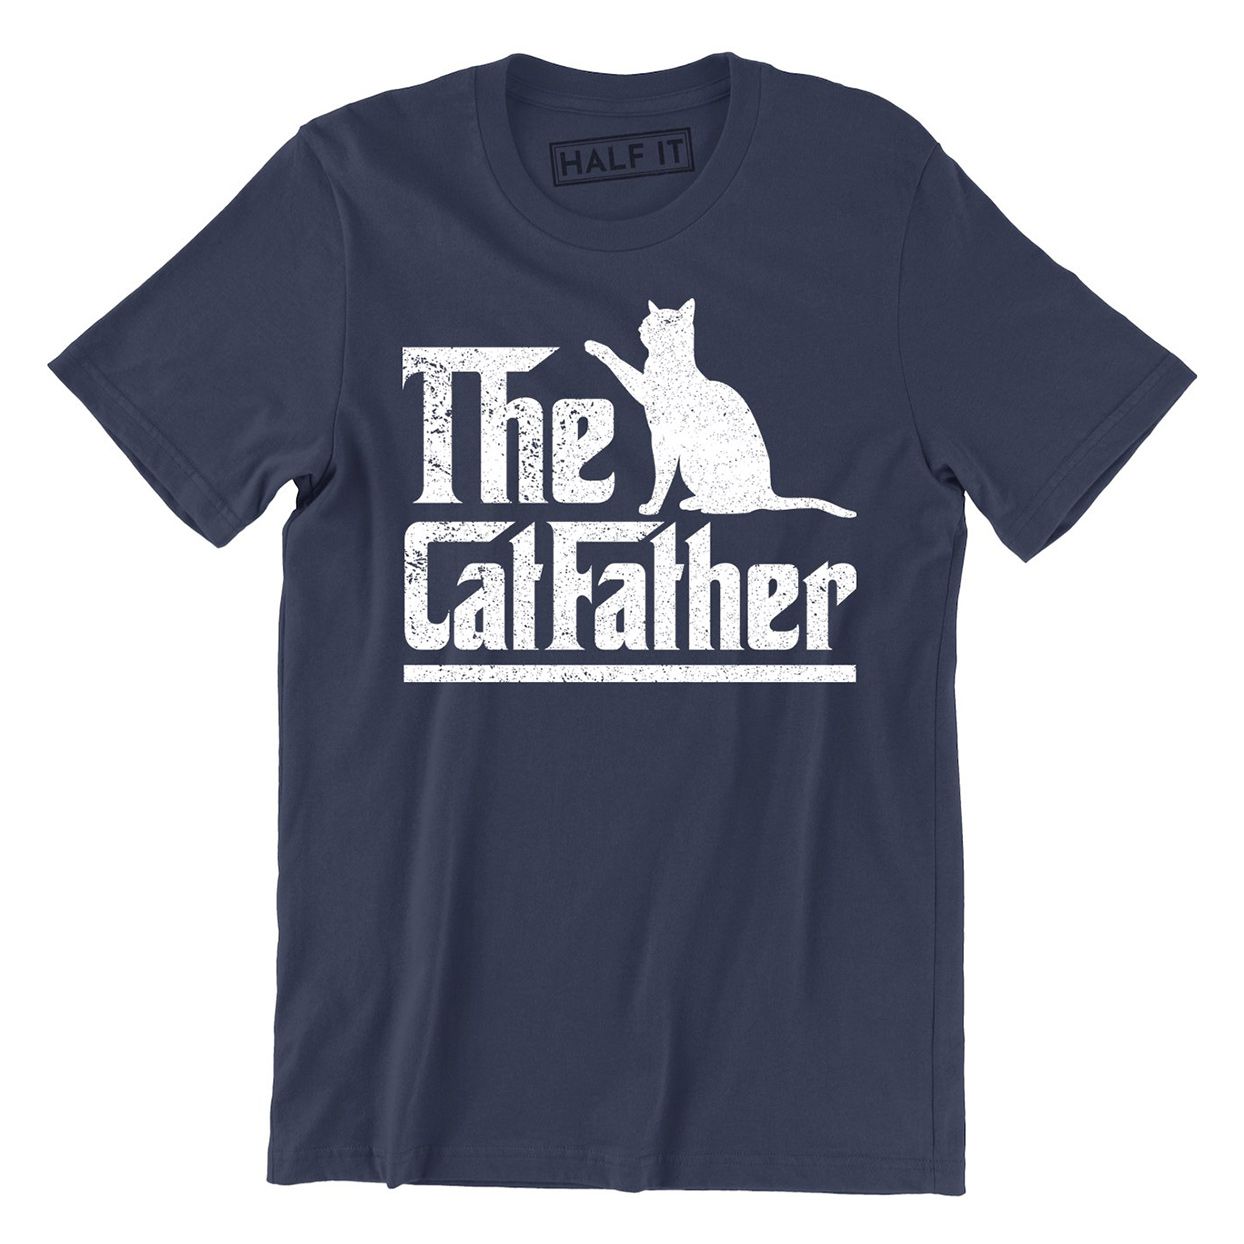 Product photo of the The Catfather Shirt on a white background